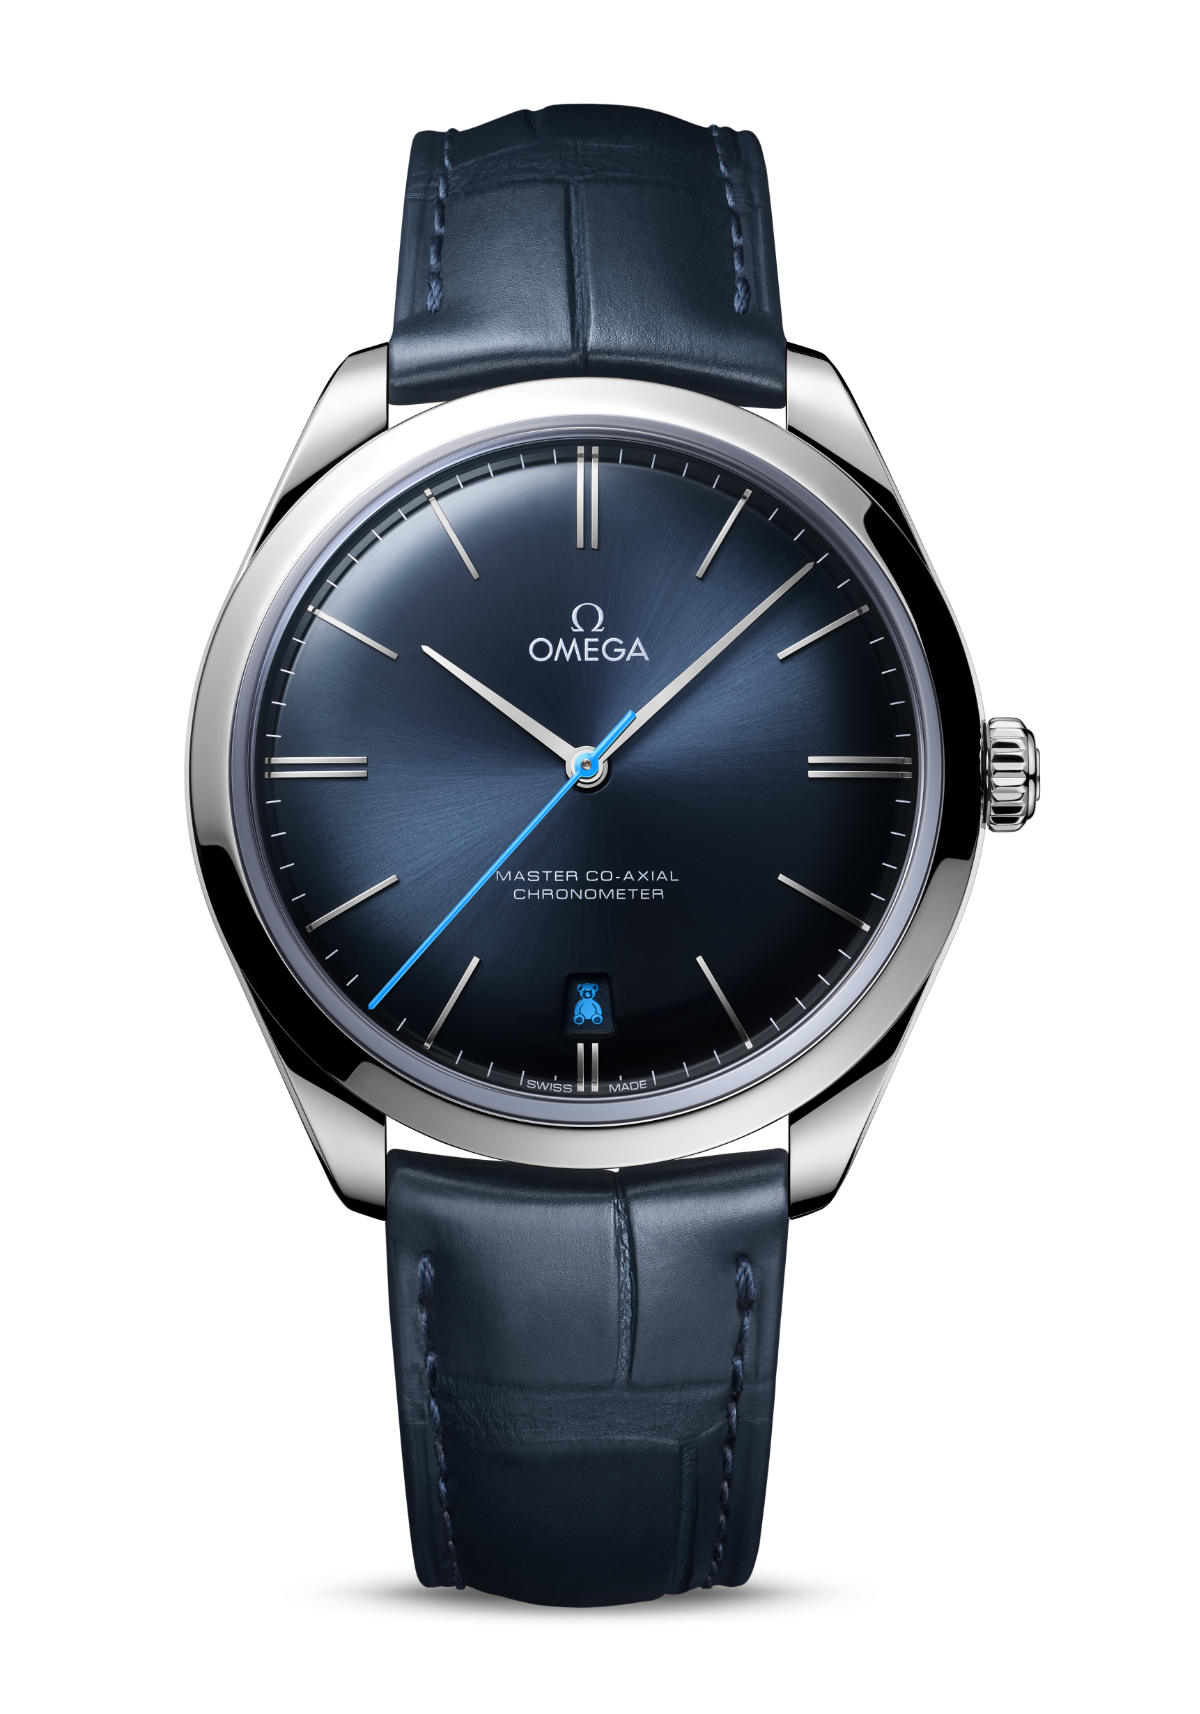 OMEGA: Two watches for one great cause